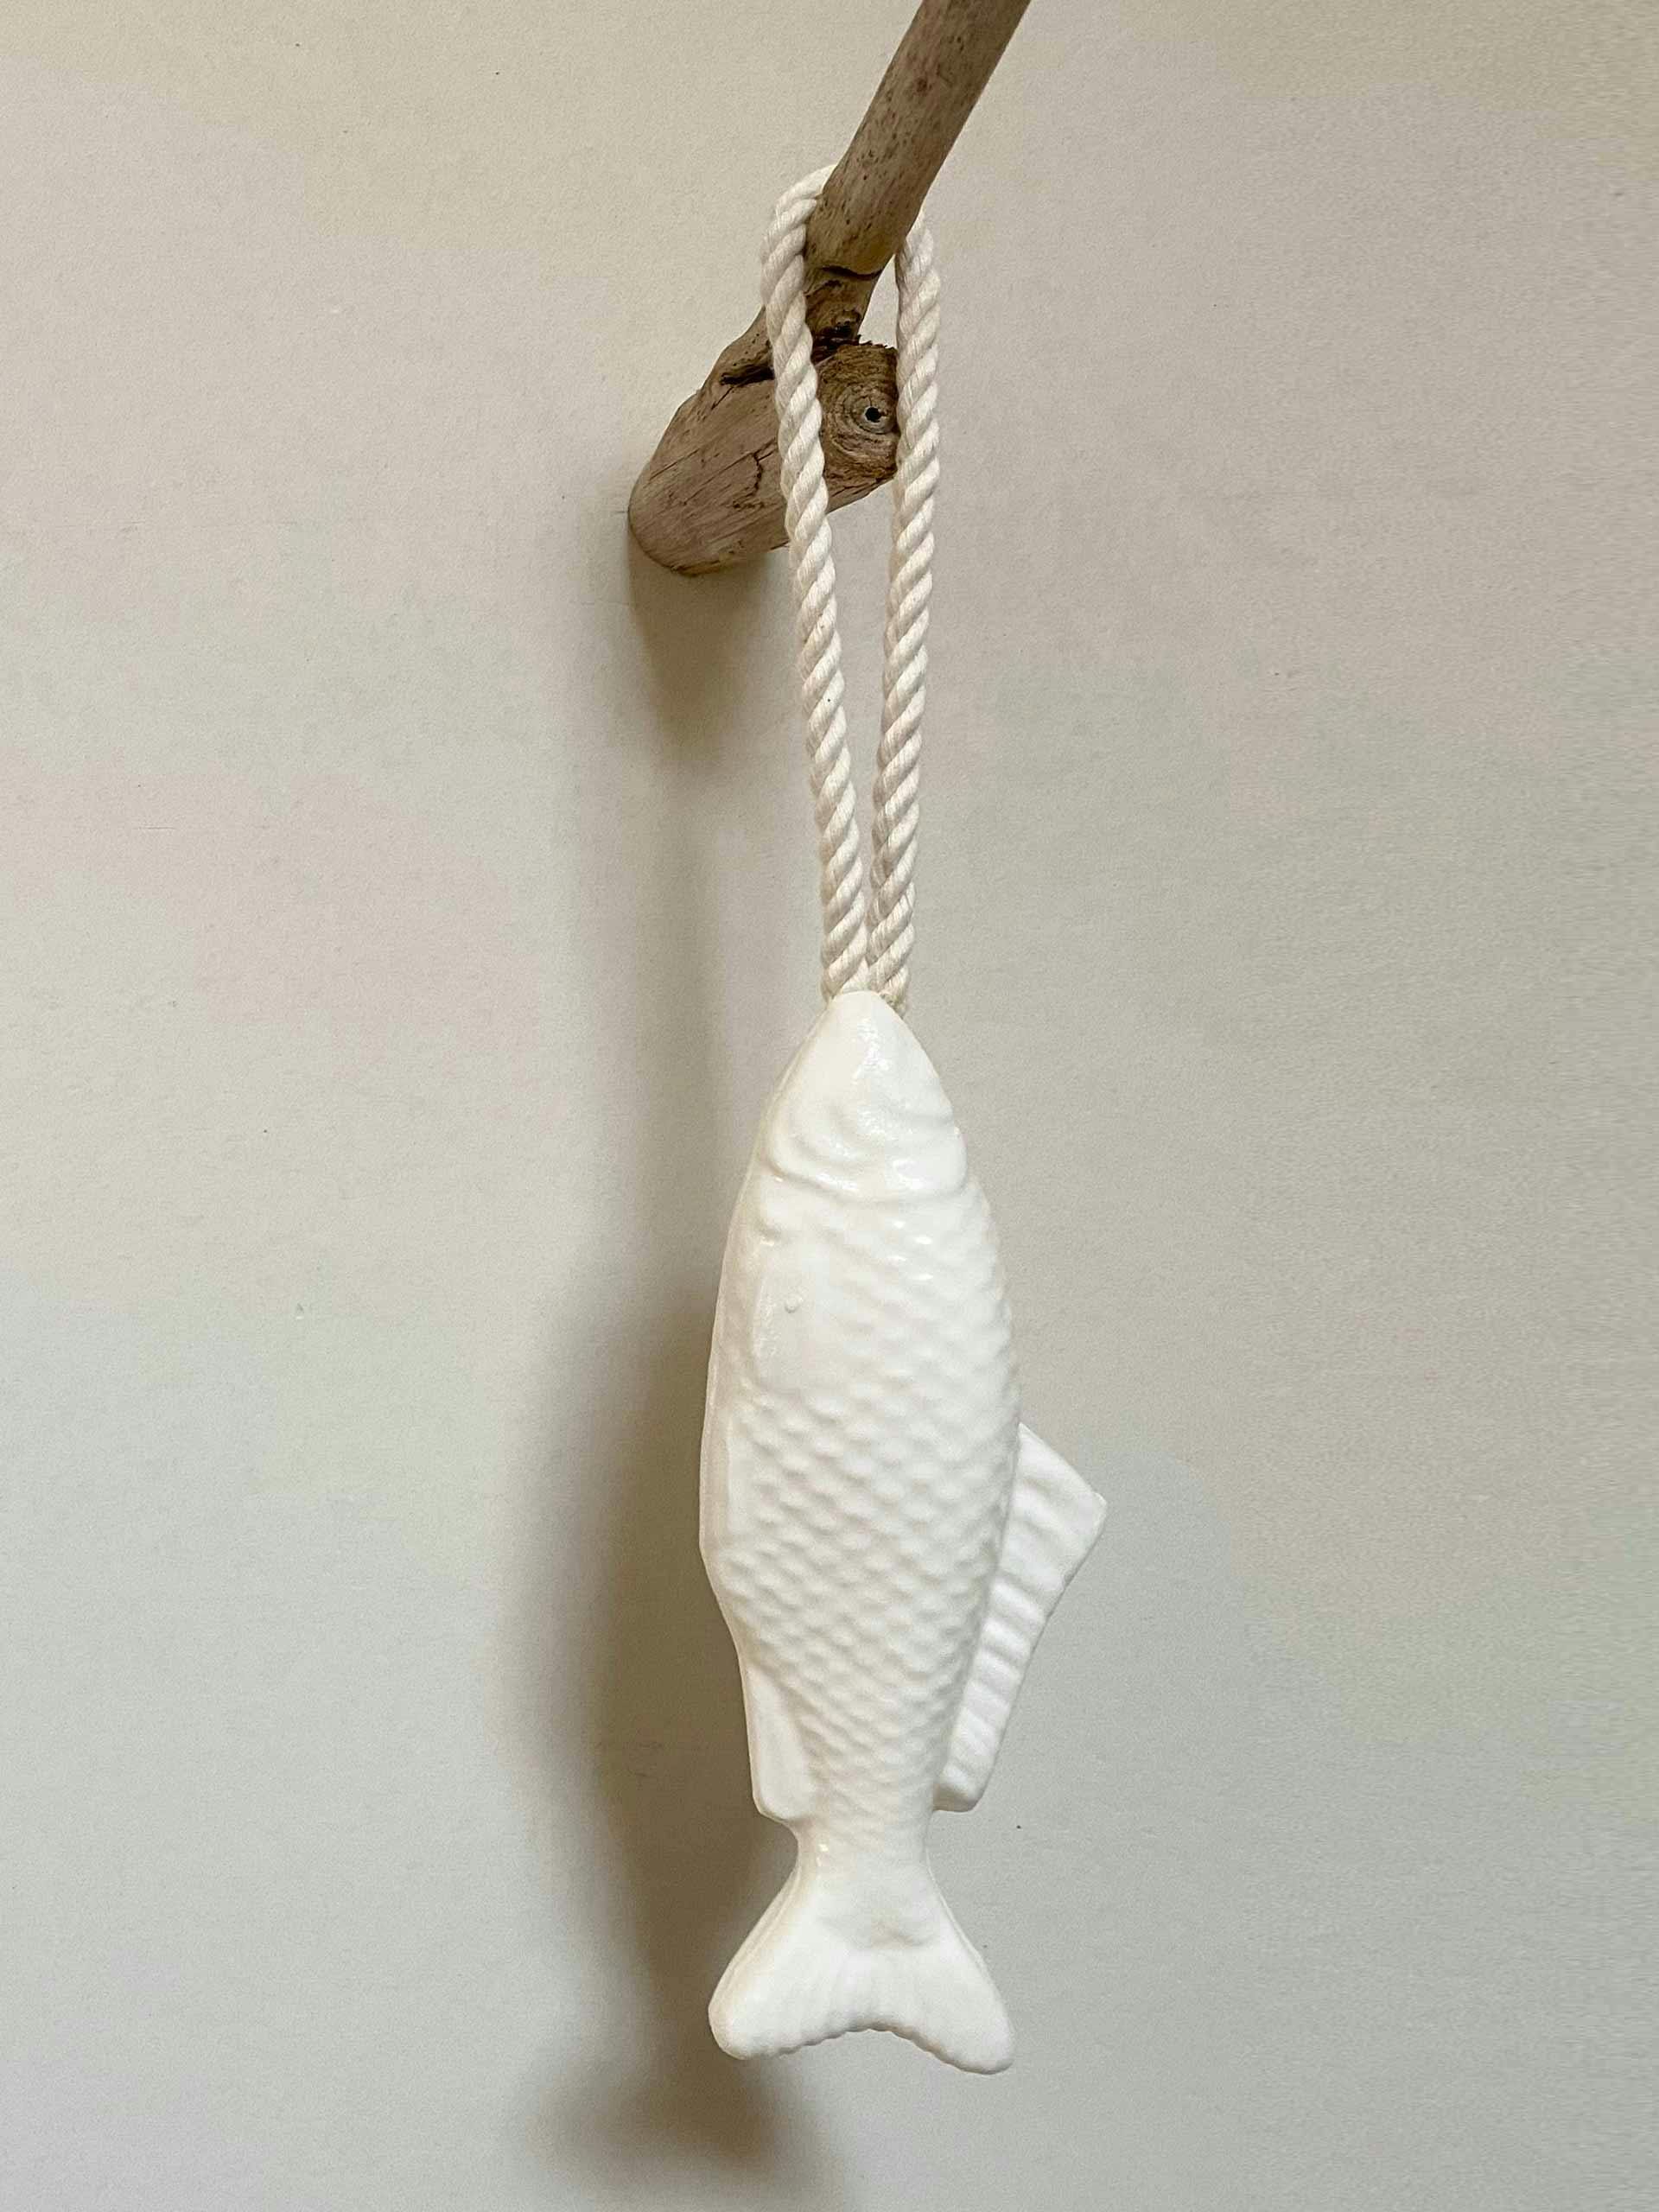 Soap on a rope